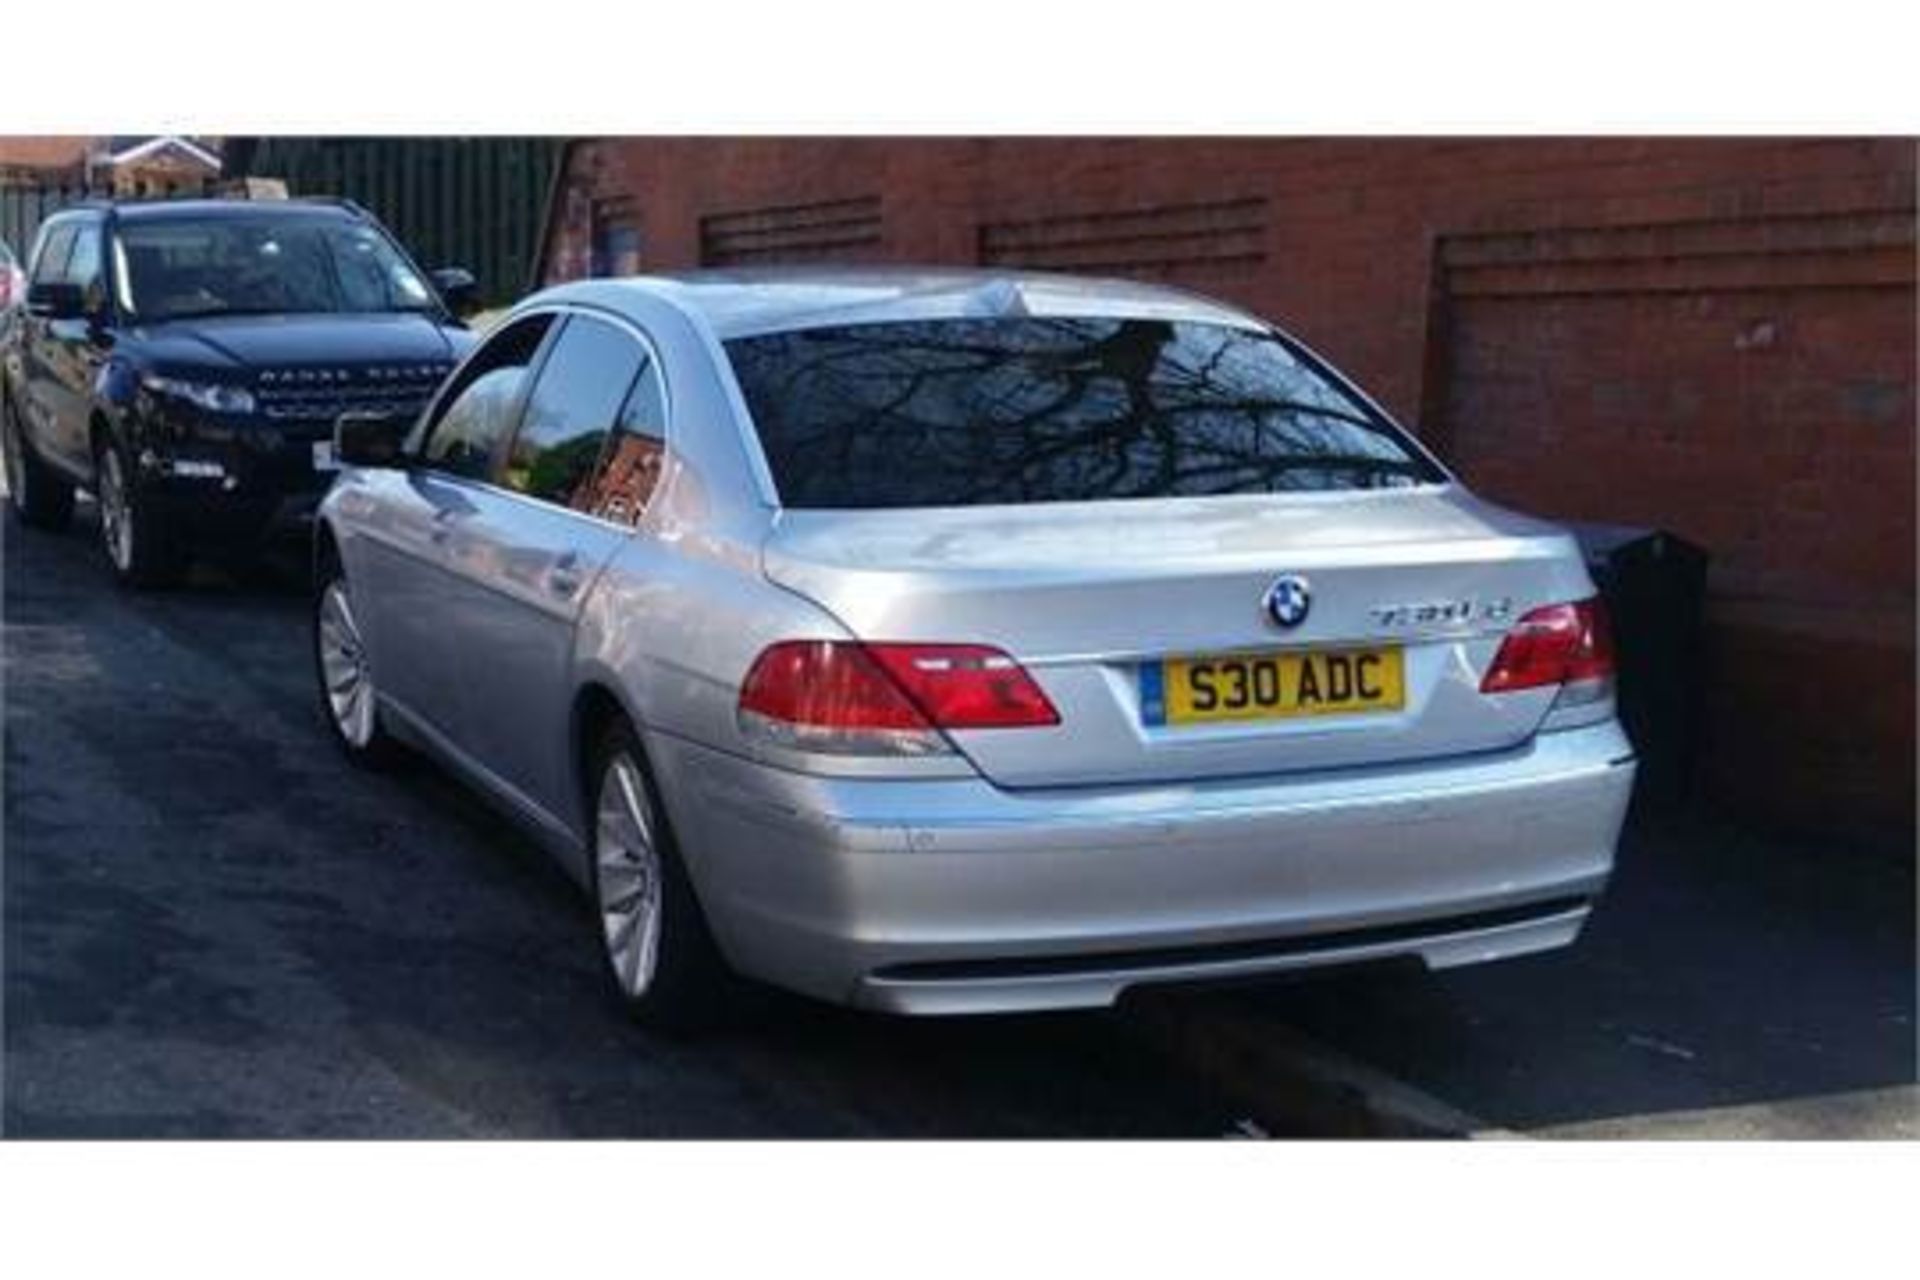 BMW, 7 SERIES 730 LD.TD, 5 30 ADC, 3.0 LTR TD SE, DIESEL, AUTOMATIC, 6 SPEED,4 DOOR SALOON, 228.